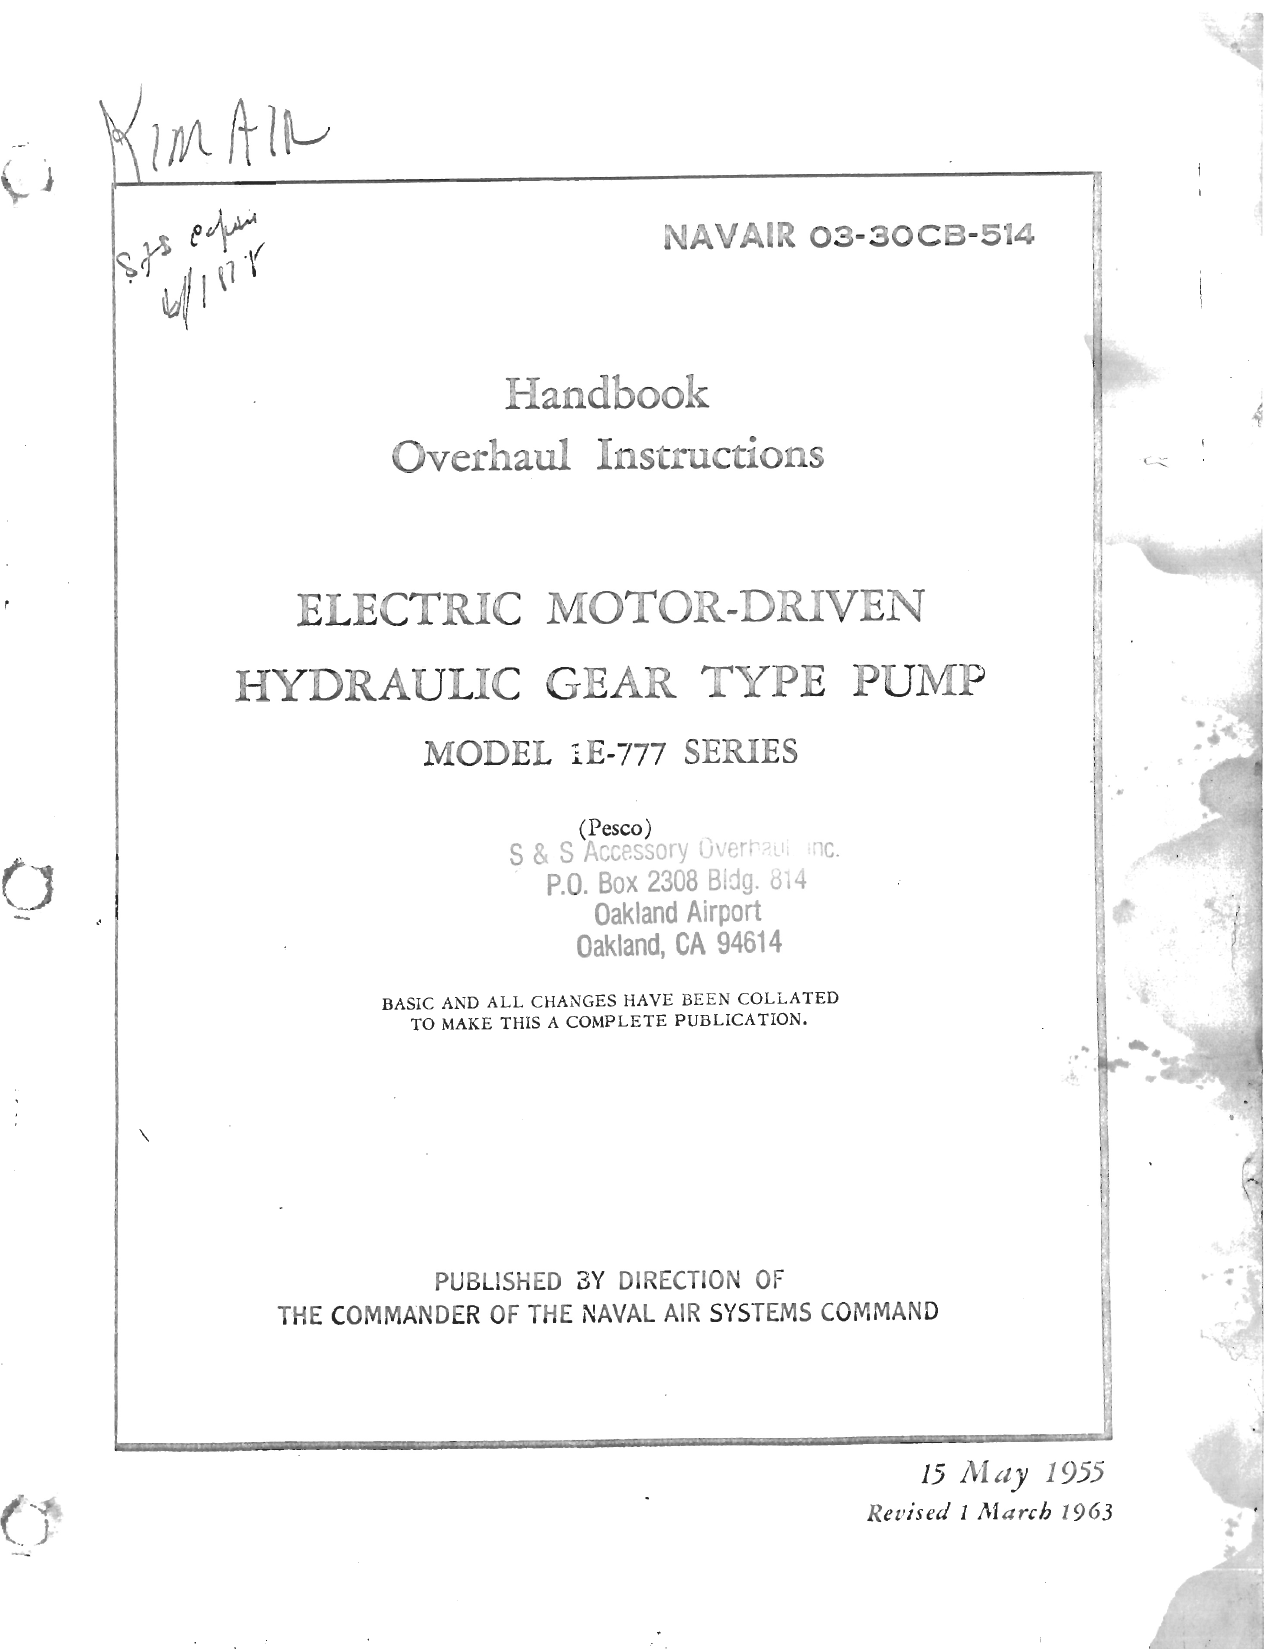 Sample page 1 from AirCorps Library document: Overhaul Instructions for Electric Motor Driven Hydraulic Gear Type Pump - Model 1E-777 Series